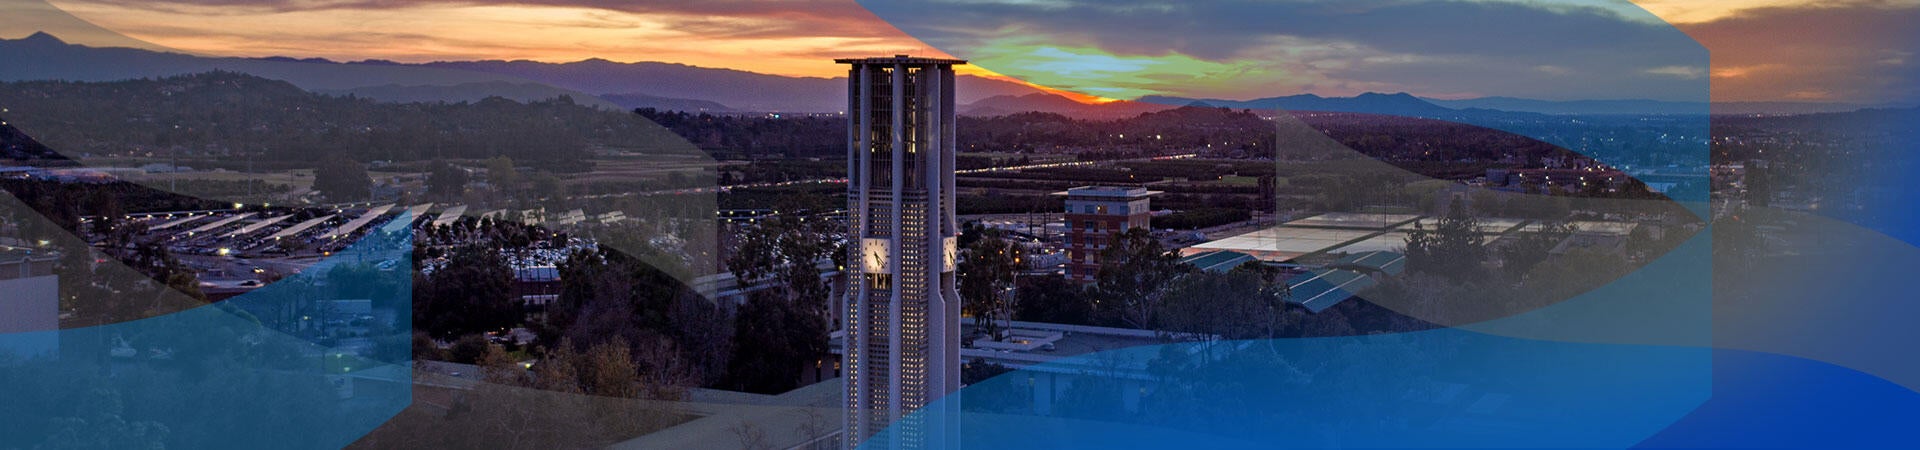 UC Riverside campus with view of bell tower at sunset